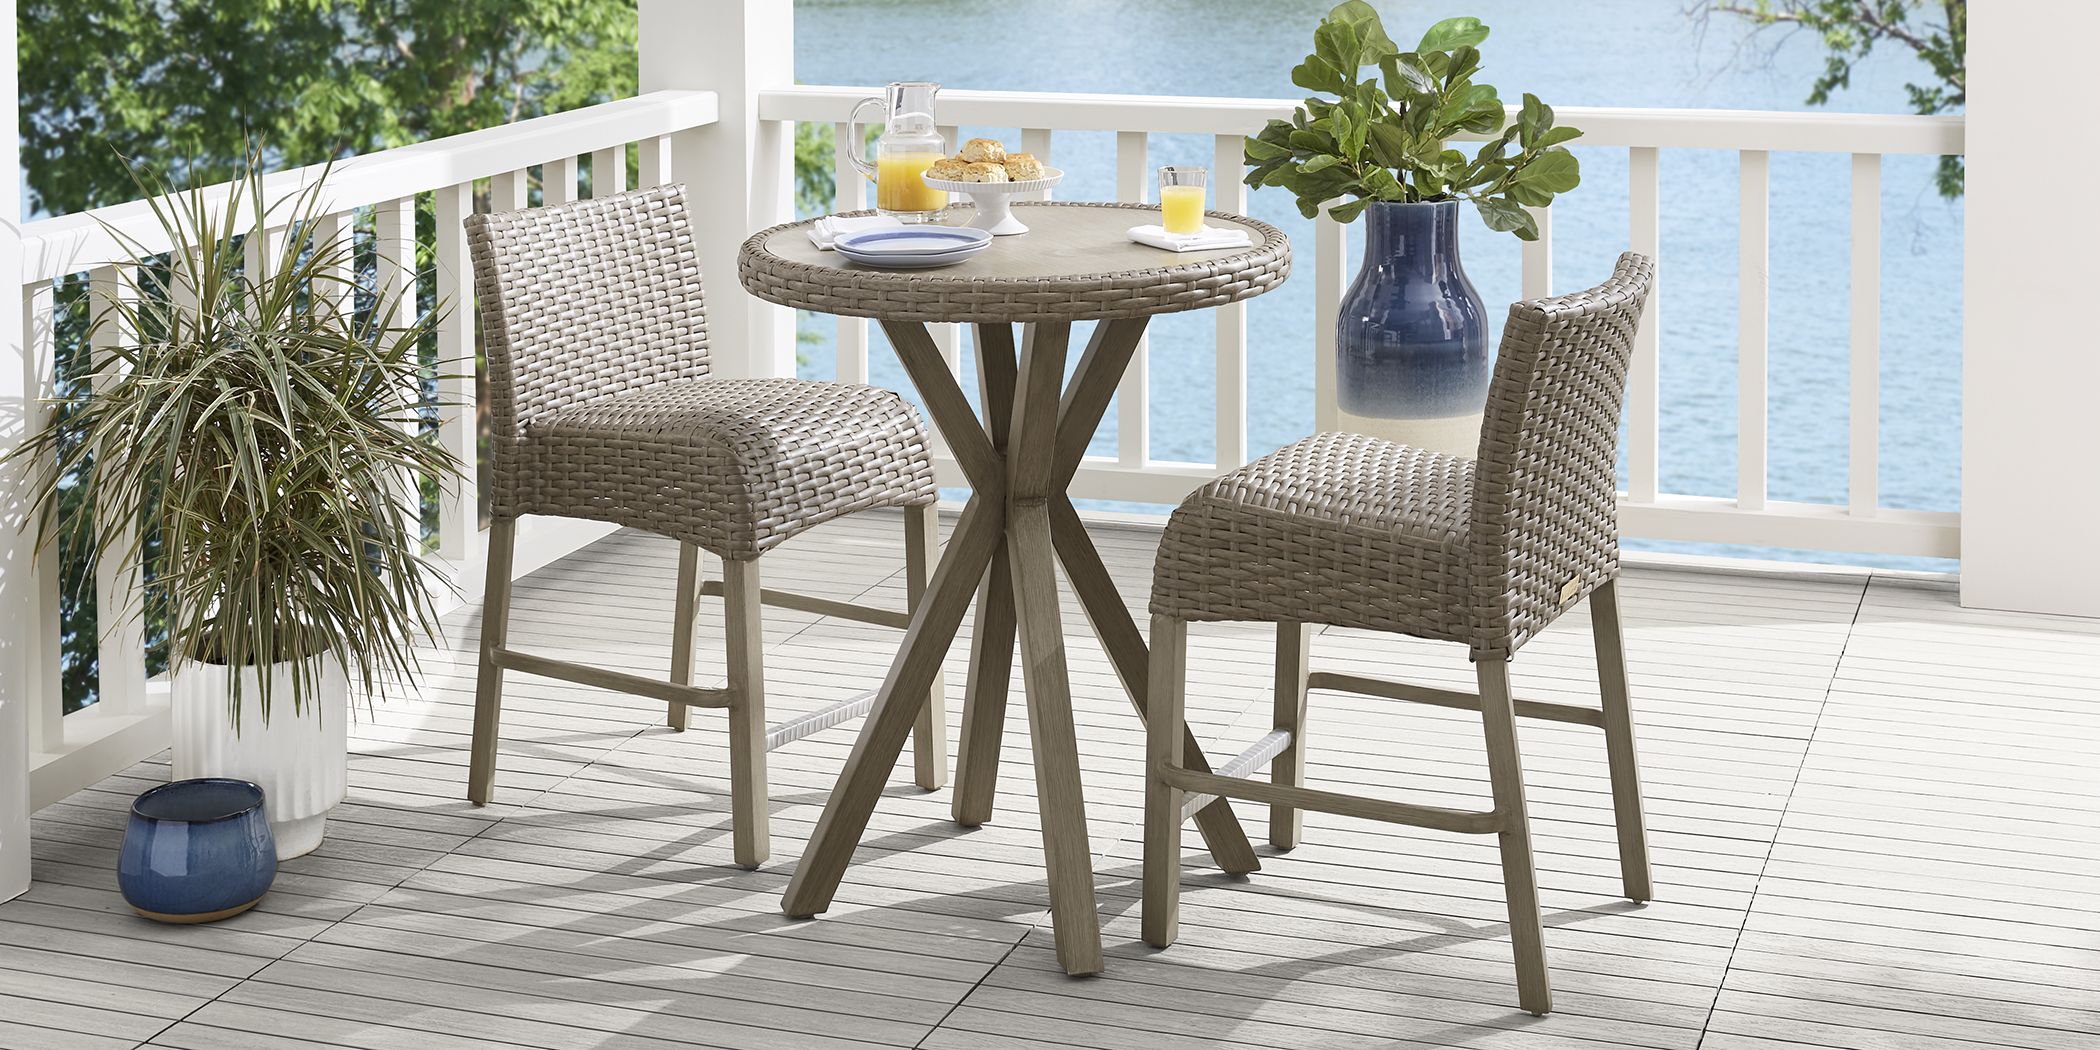 Siesta Patio Furniture Collection By Fifth And Shore